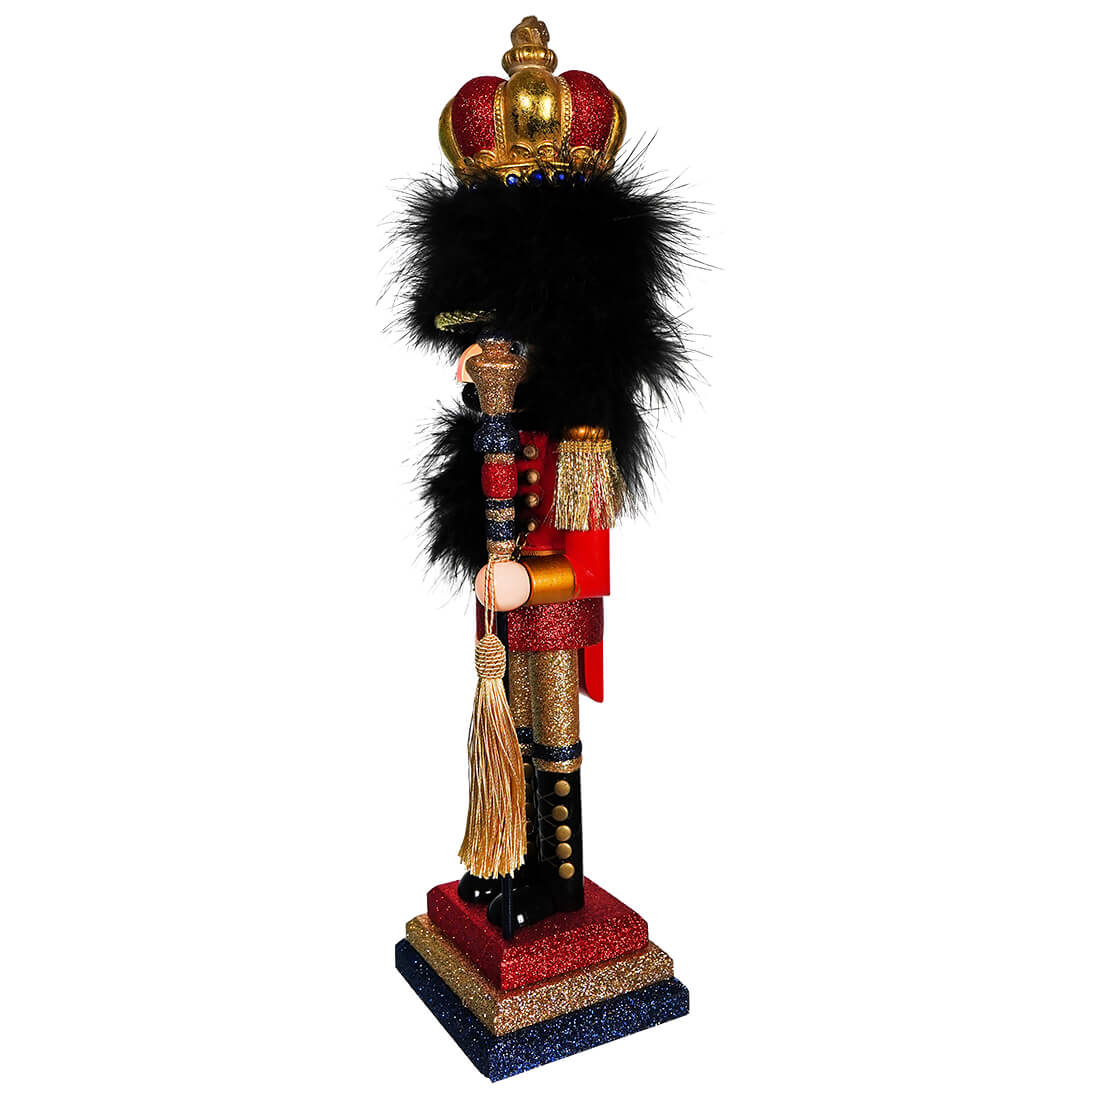 Hollywood Red & Gold Nutcracker King Wearing Crown